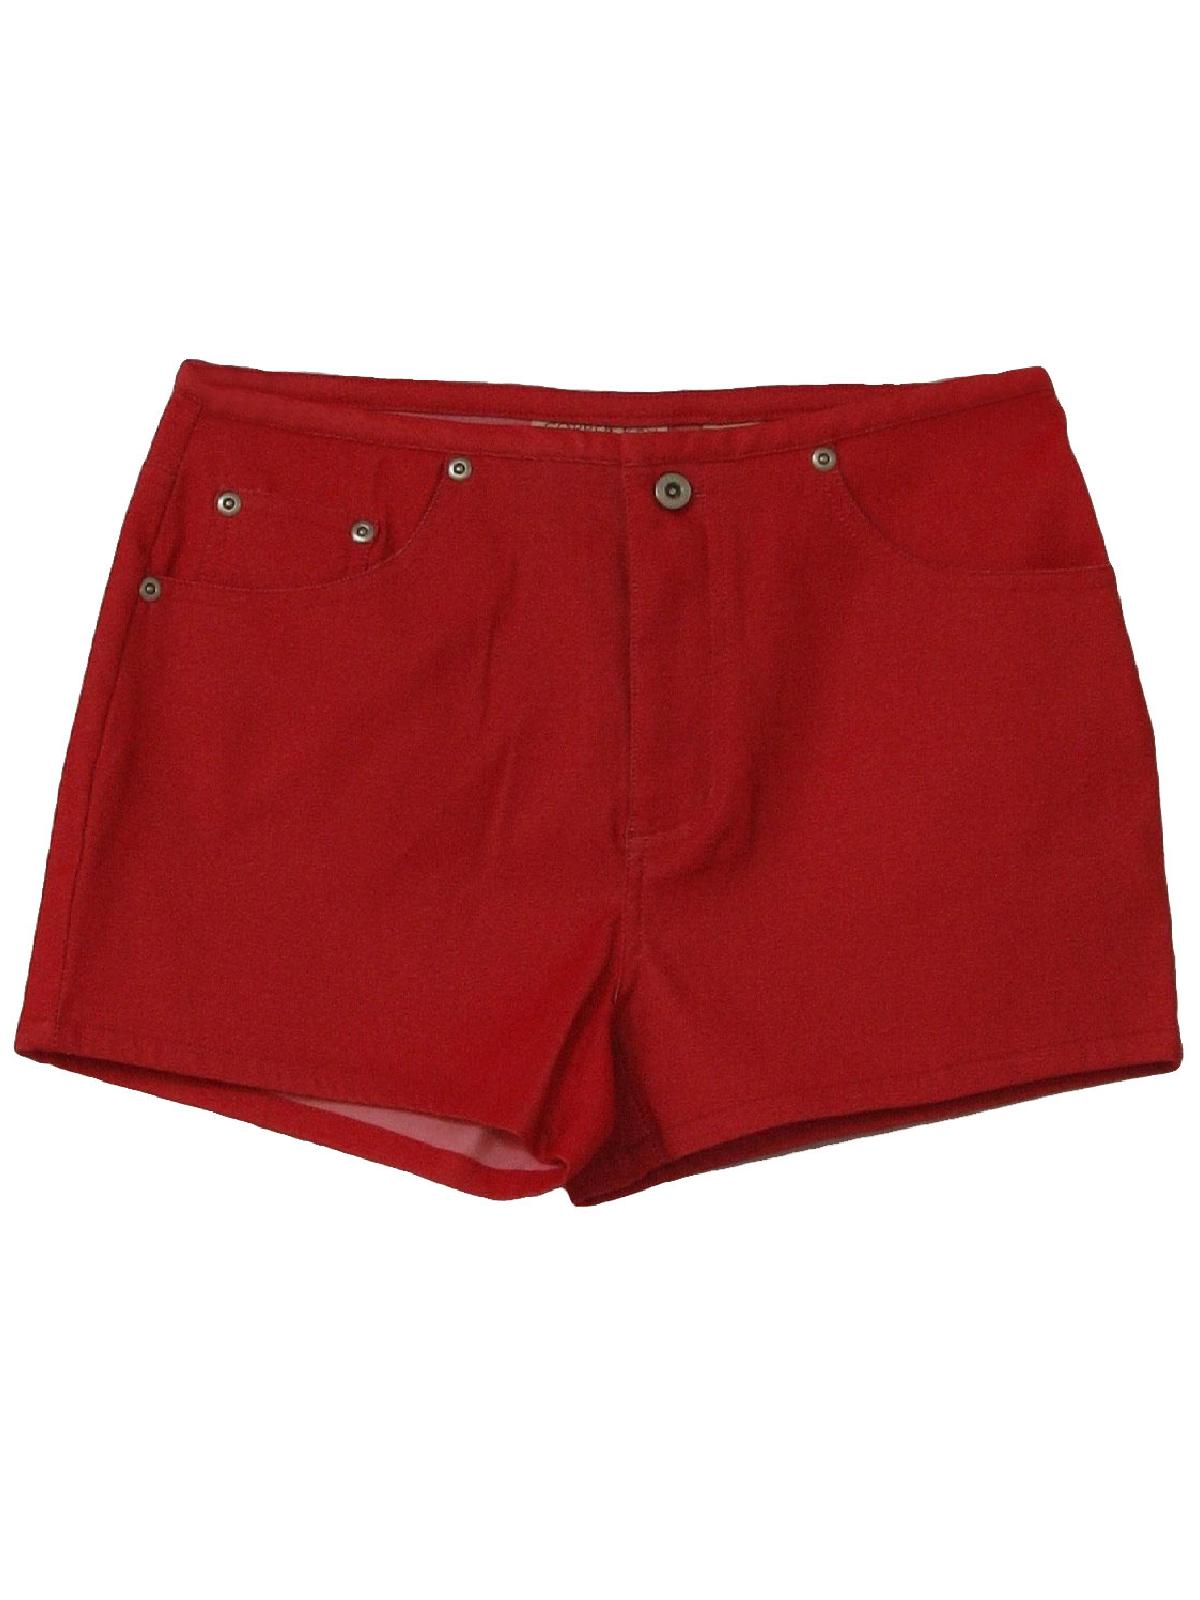 1990s Vintage Shorts: 90s -Copper Key- Womens bright red polyester ...